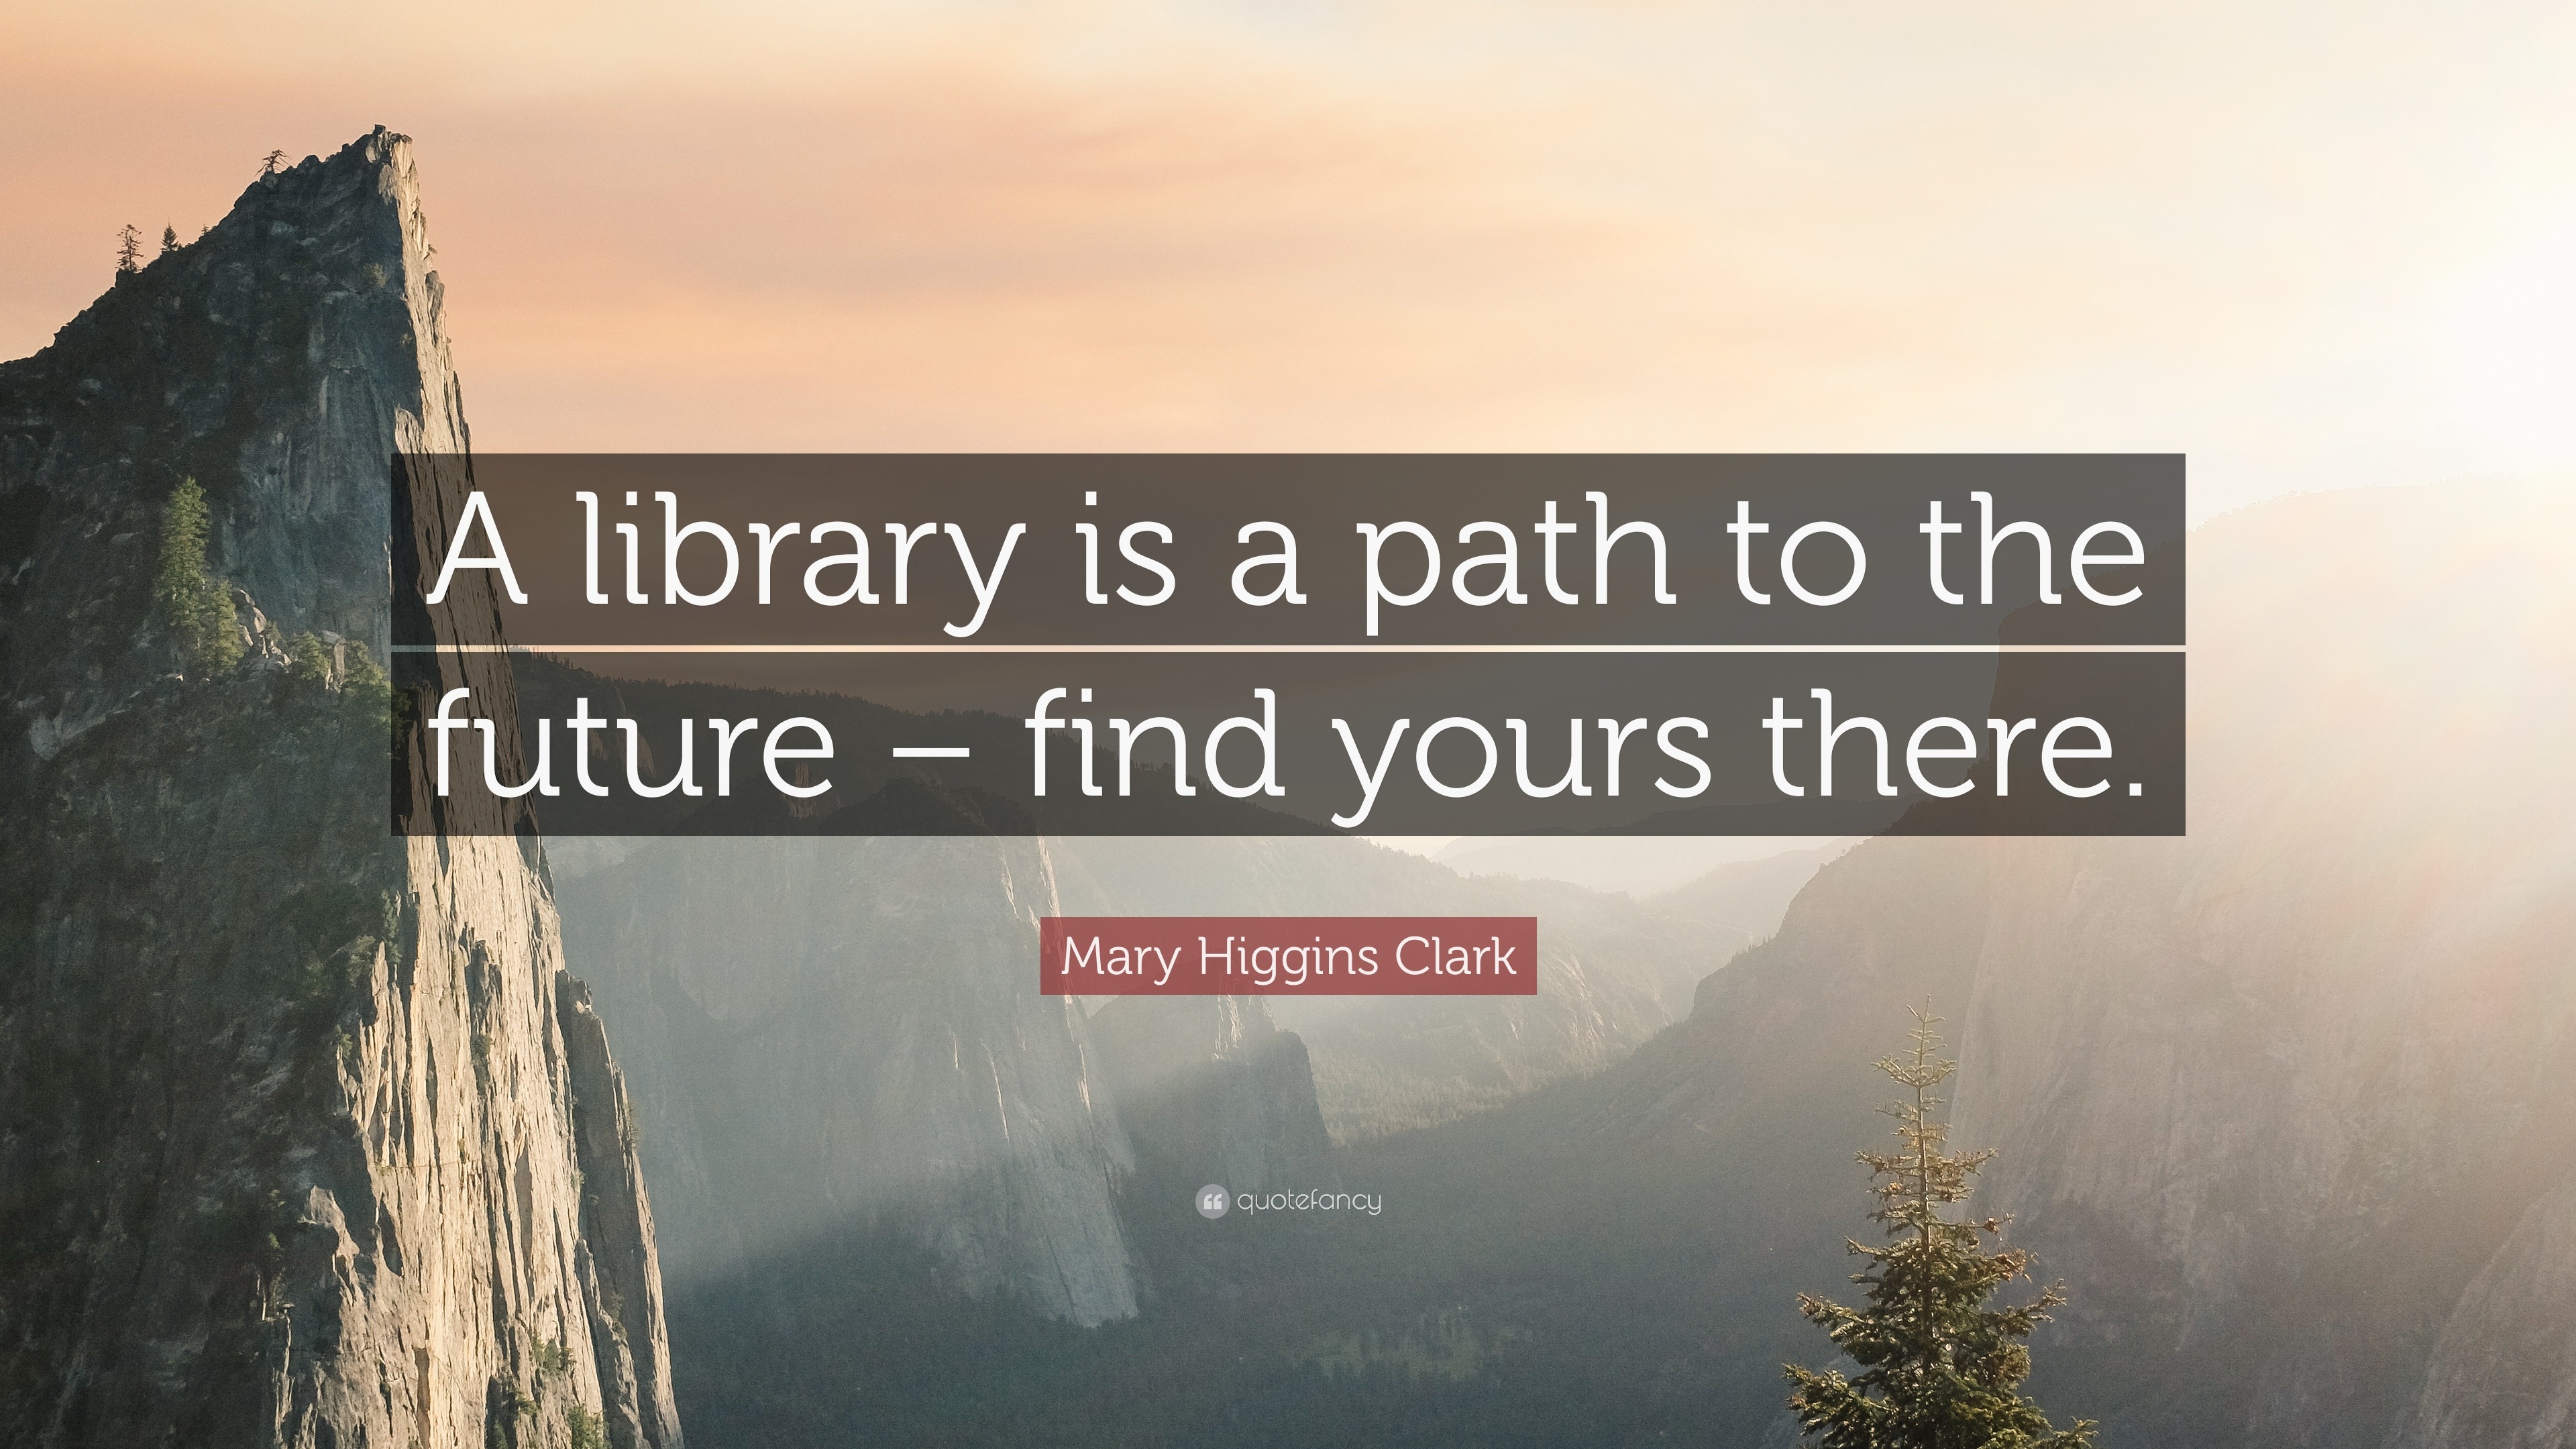 Mary Higgins Clark Quote: “A library is a path to the future – find yours there ...